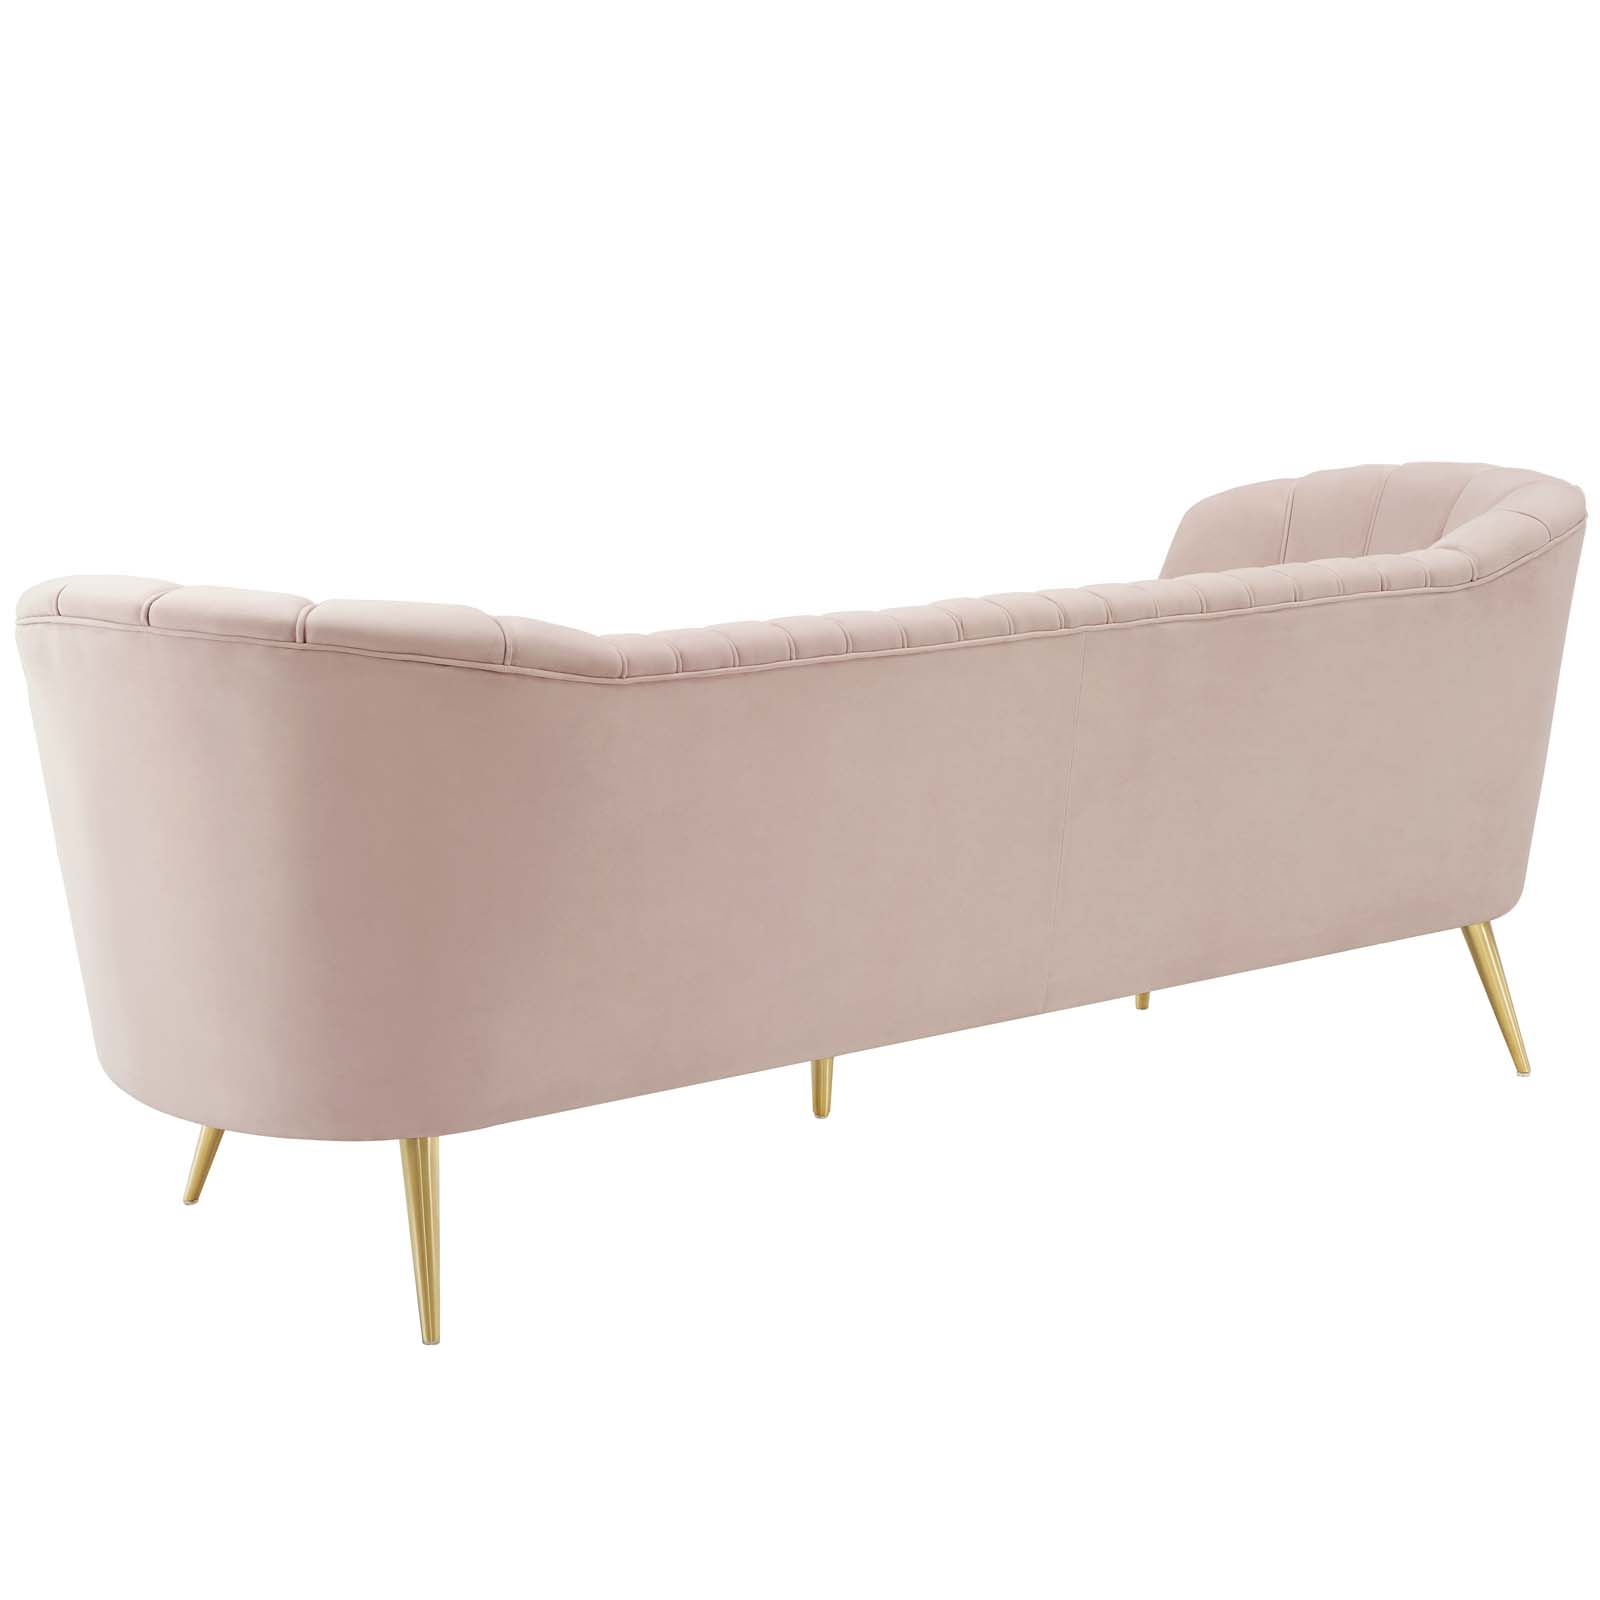 Opportunity Vertical Channel Tufted Curved Performance Velvet Sofa - image 3 of 5